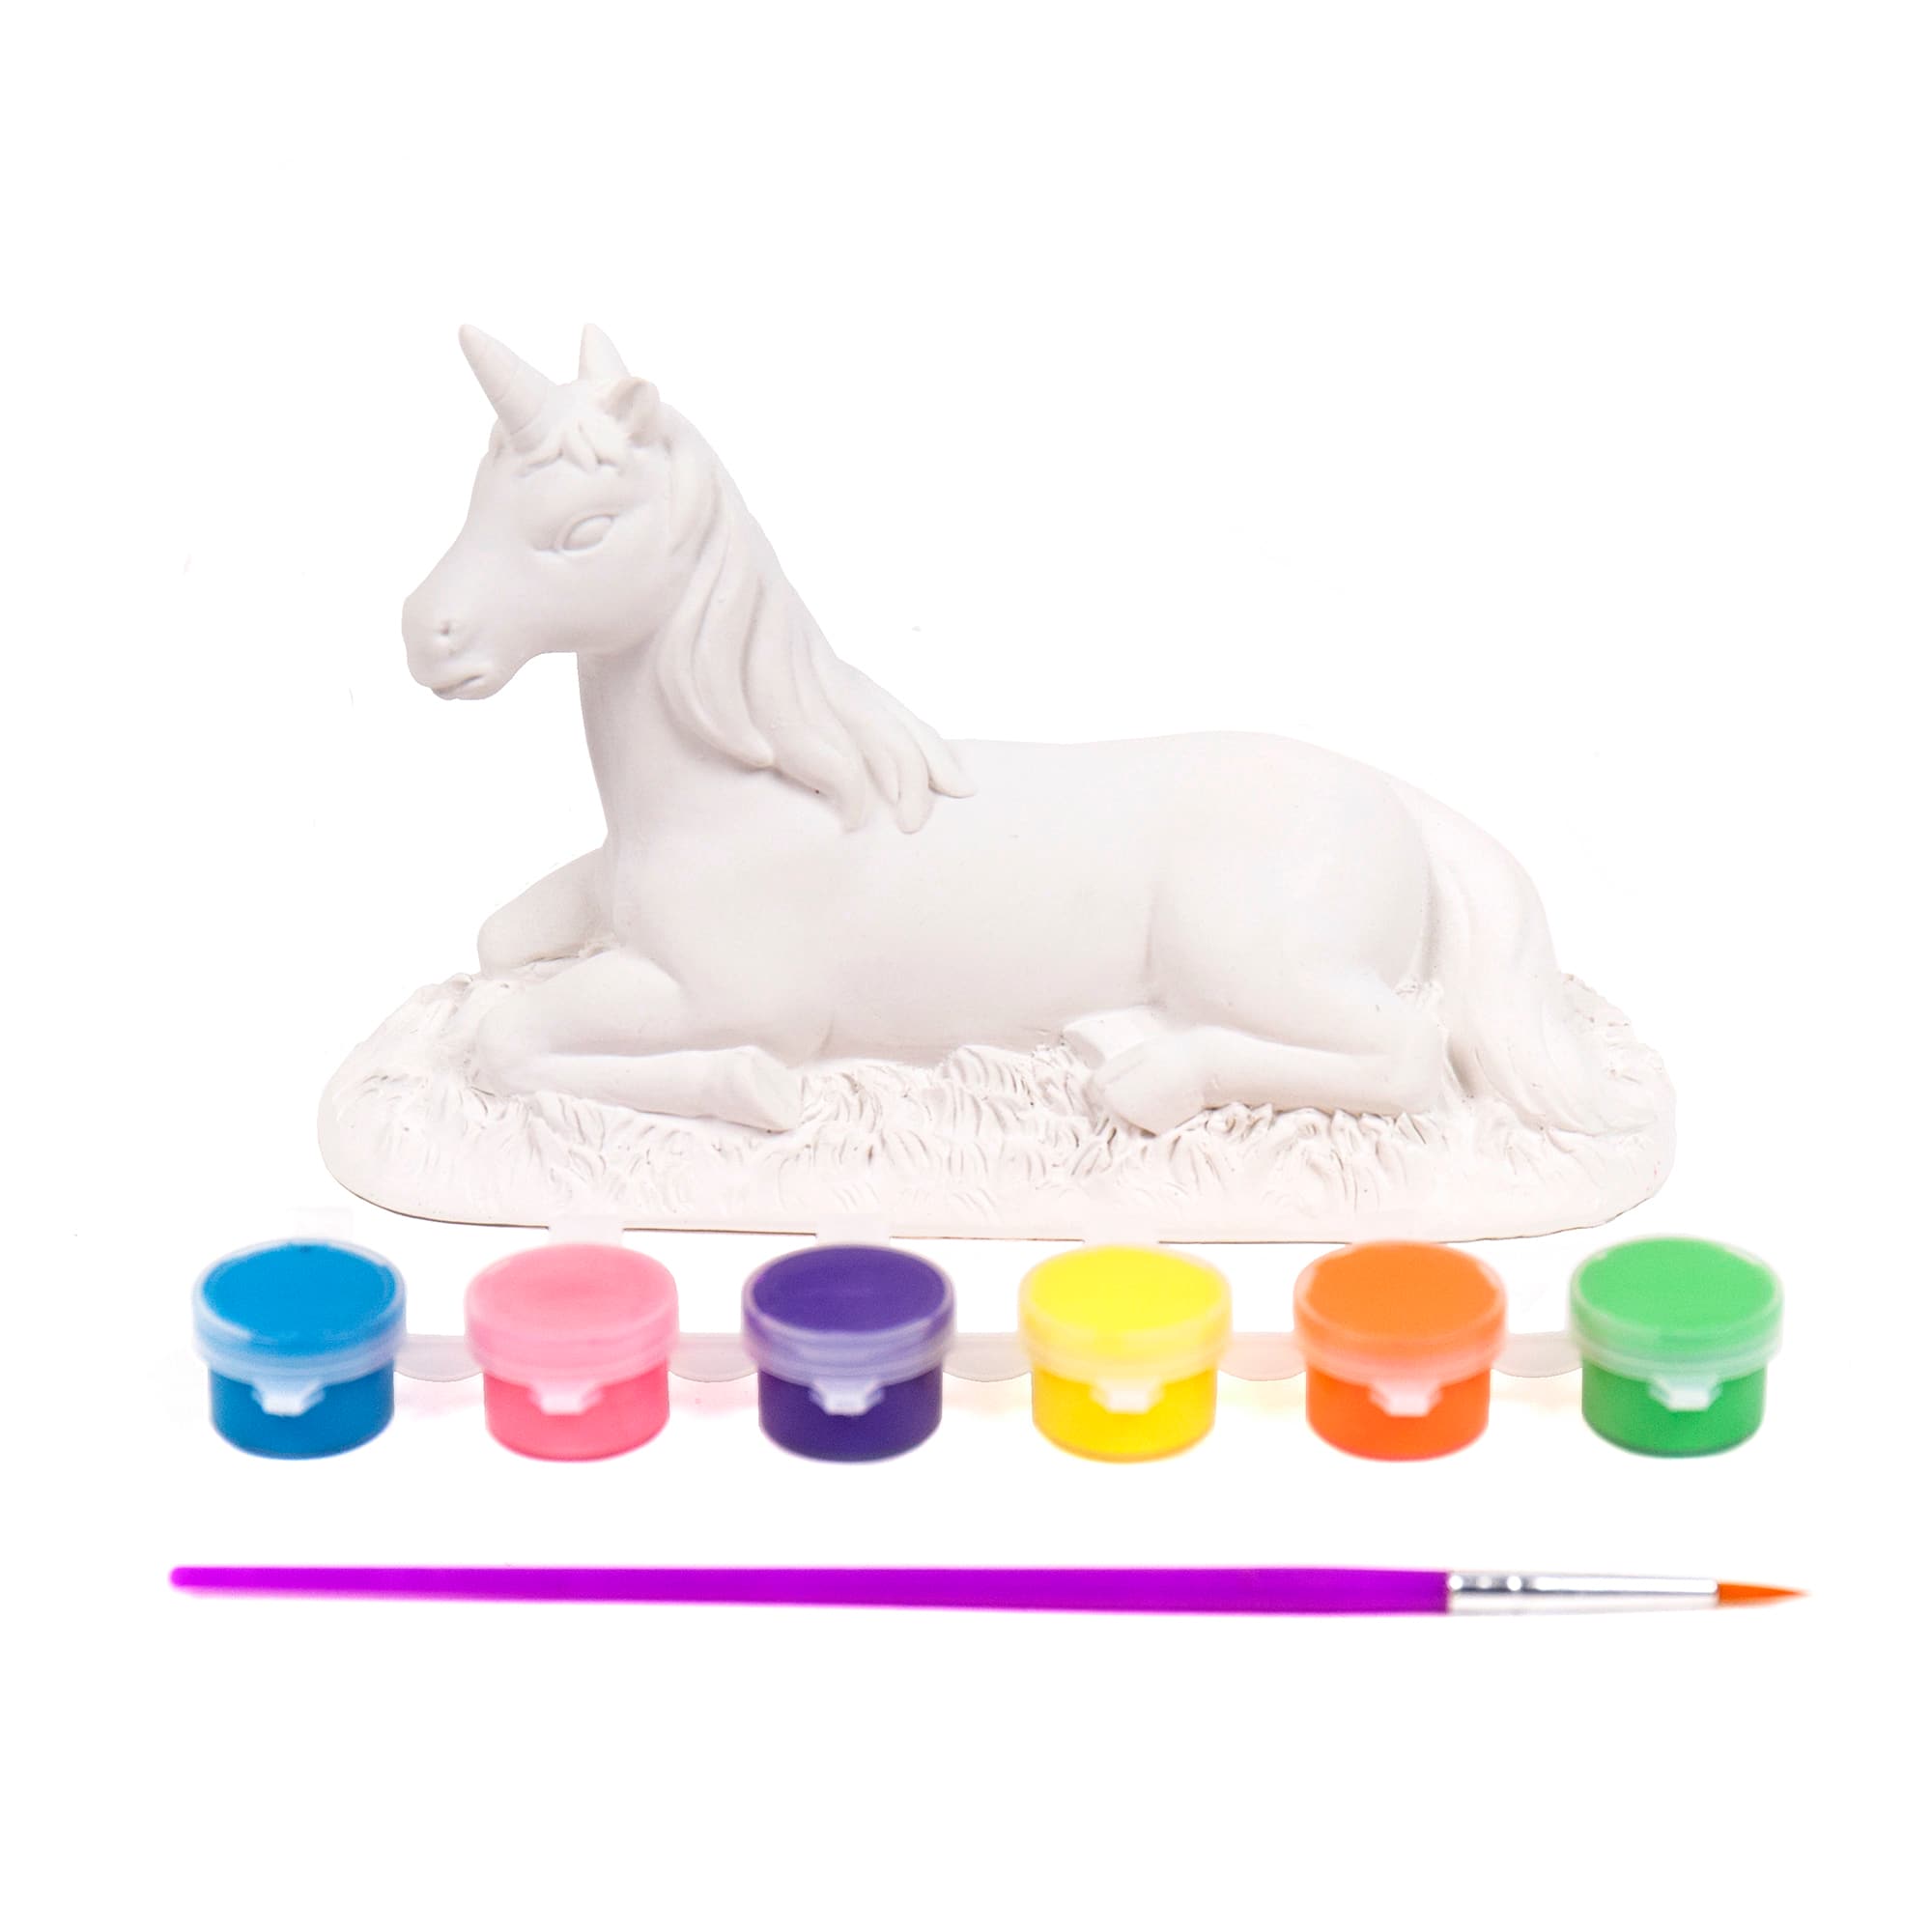 Paint Your Own Unicorn Craft Kit Ceramic Unicorn Snow Globe with Painting  Art Crafts Unicorn Gift for Girls Tweens DIY Paint Potion Making Activity